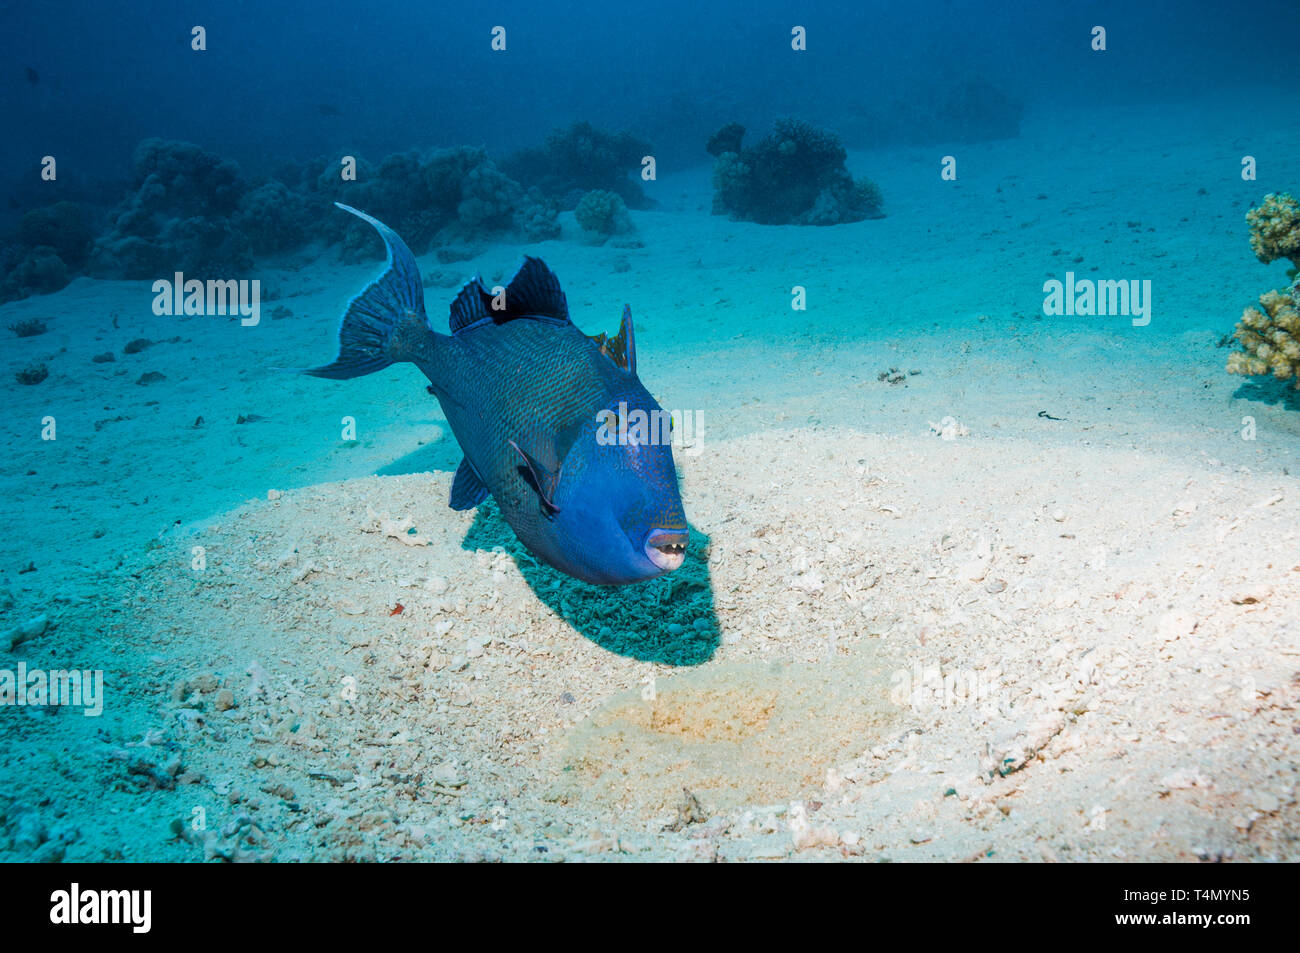 Blue triggerfish [Pseudobalistes fuscus] aerating and guarding eggs in large 'nest'.  Egypt, Red Sea. Stock Photo